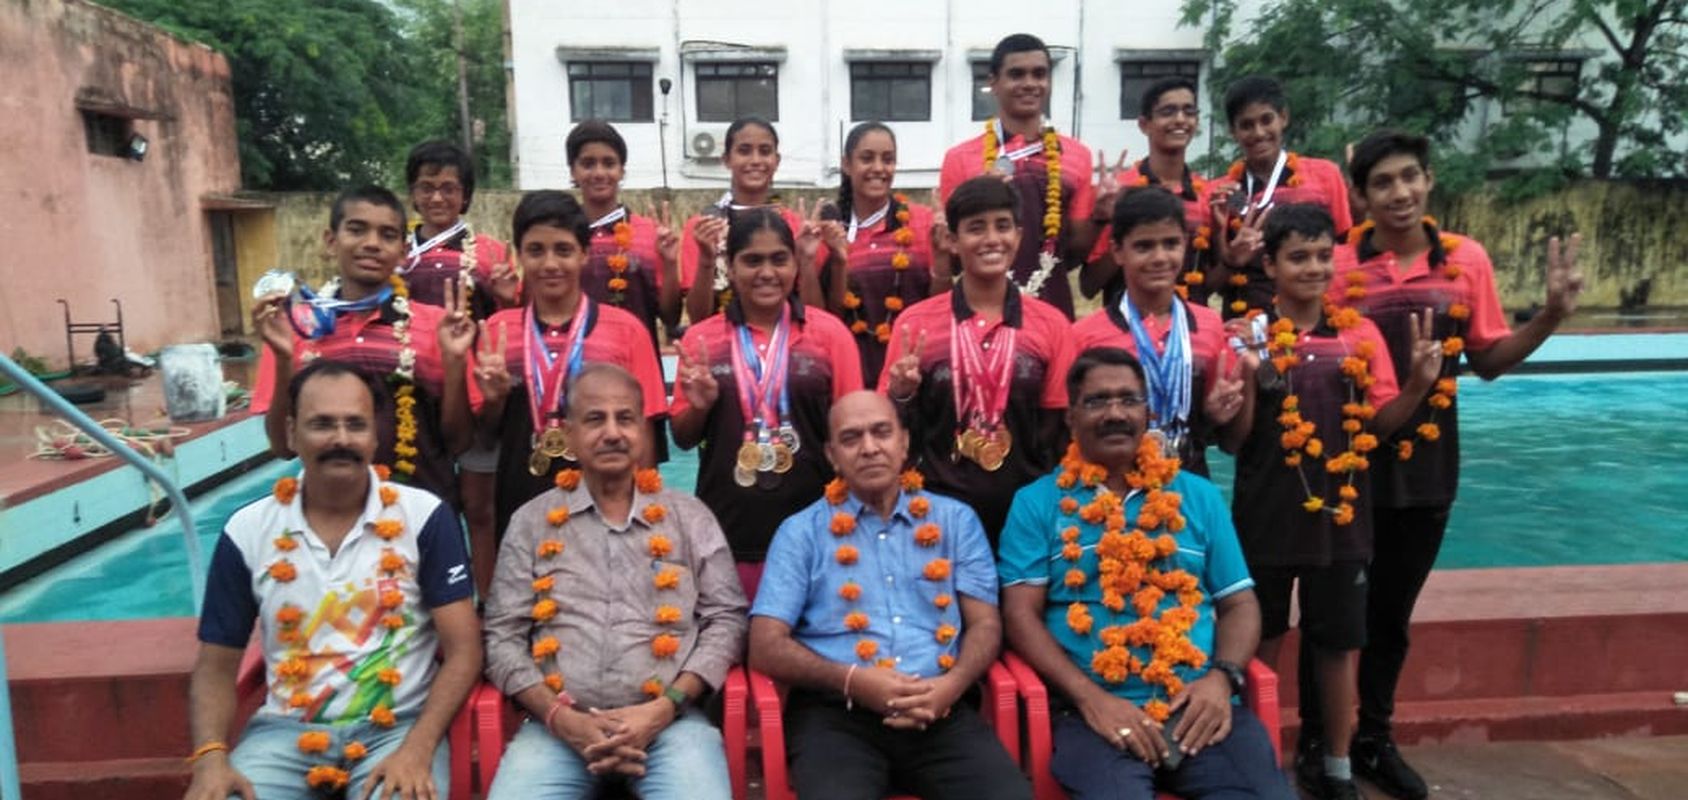 sai-udaipur-center-won-51-medals-including-12-gold